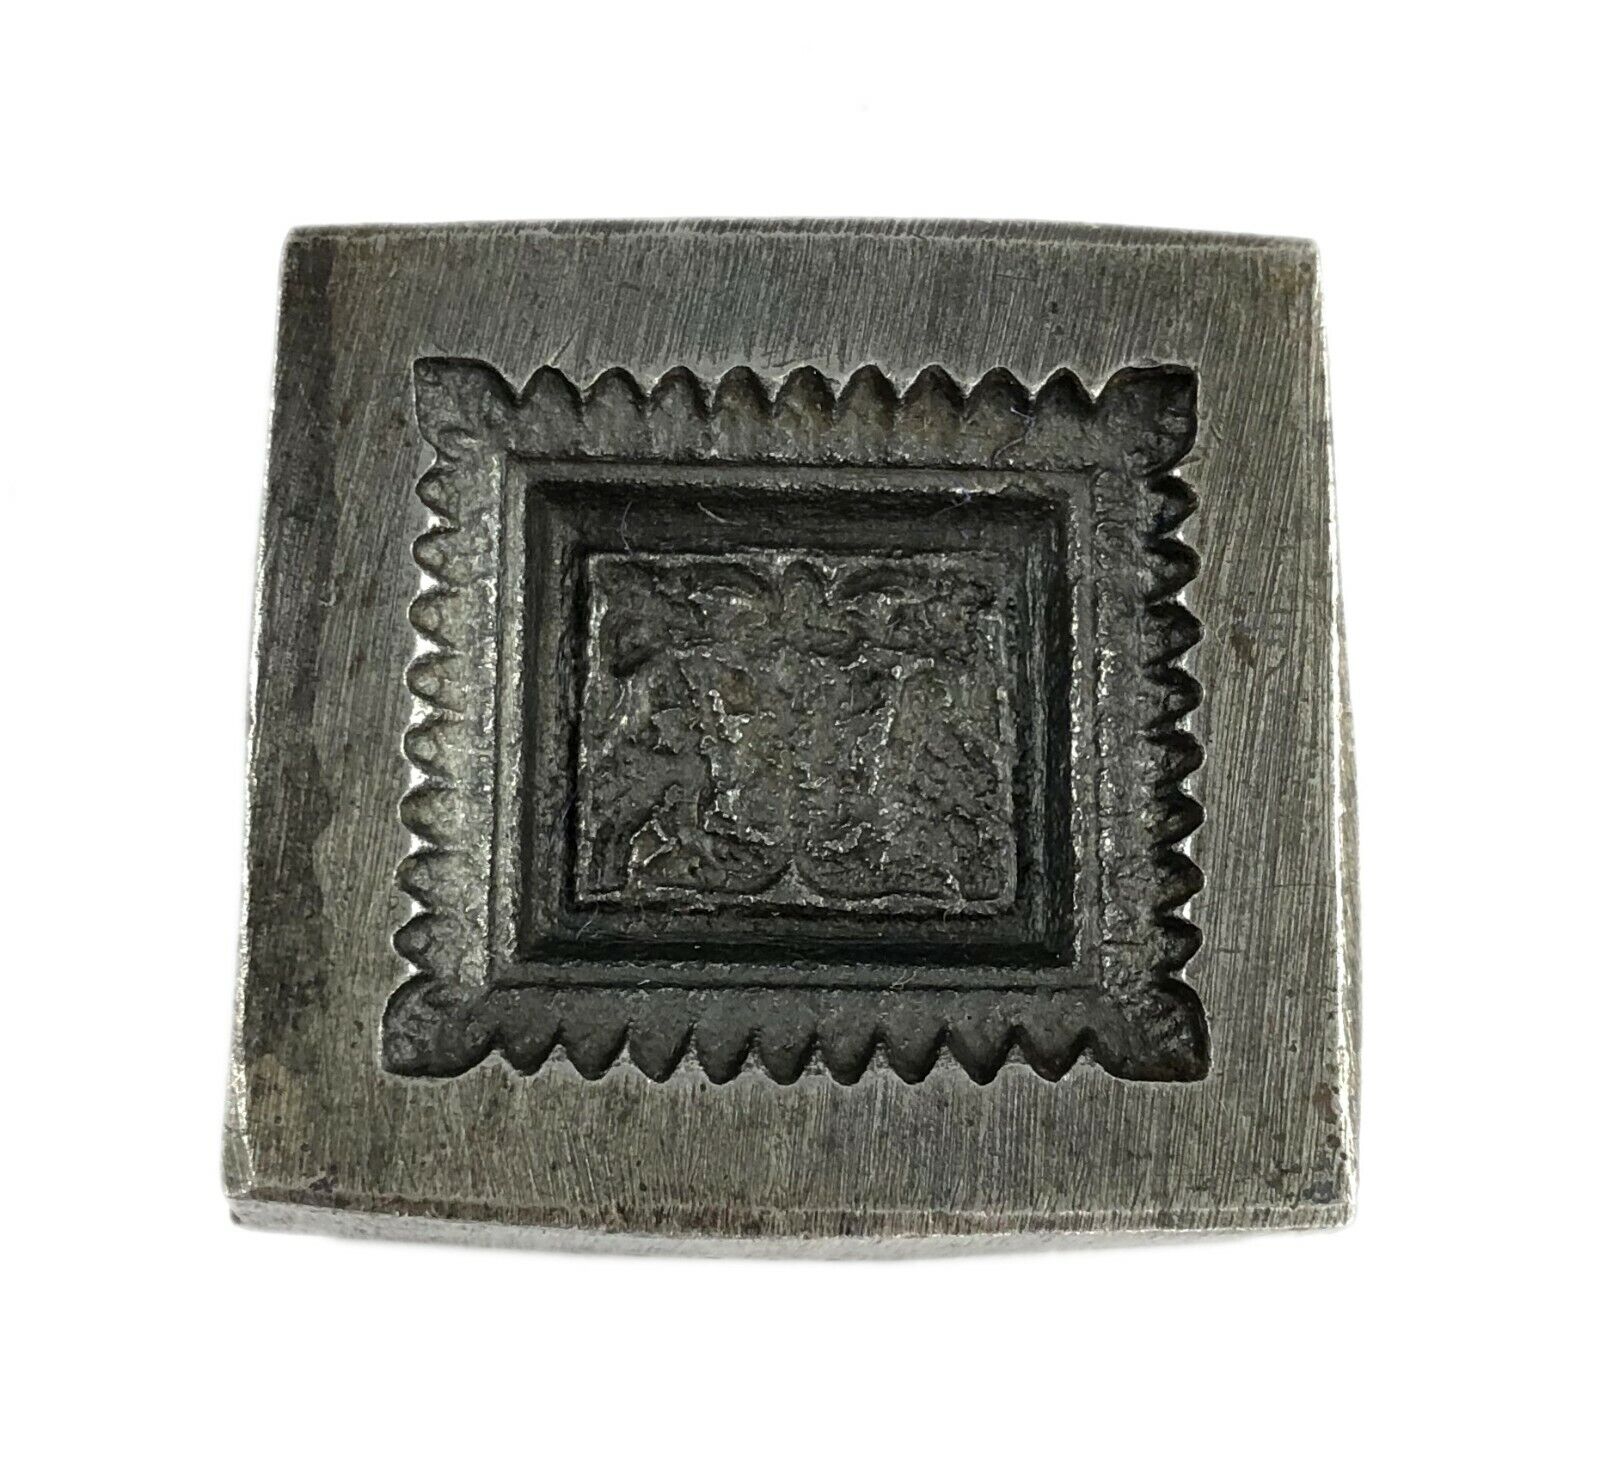 Unique Design Necklace, Pendant Jewelry Maker Mould – Old Iron Stamp Dye G46-672